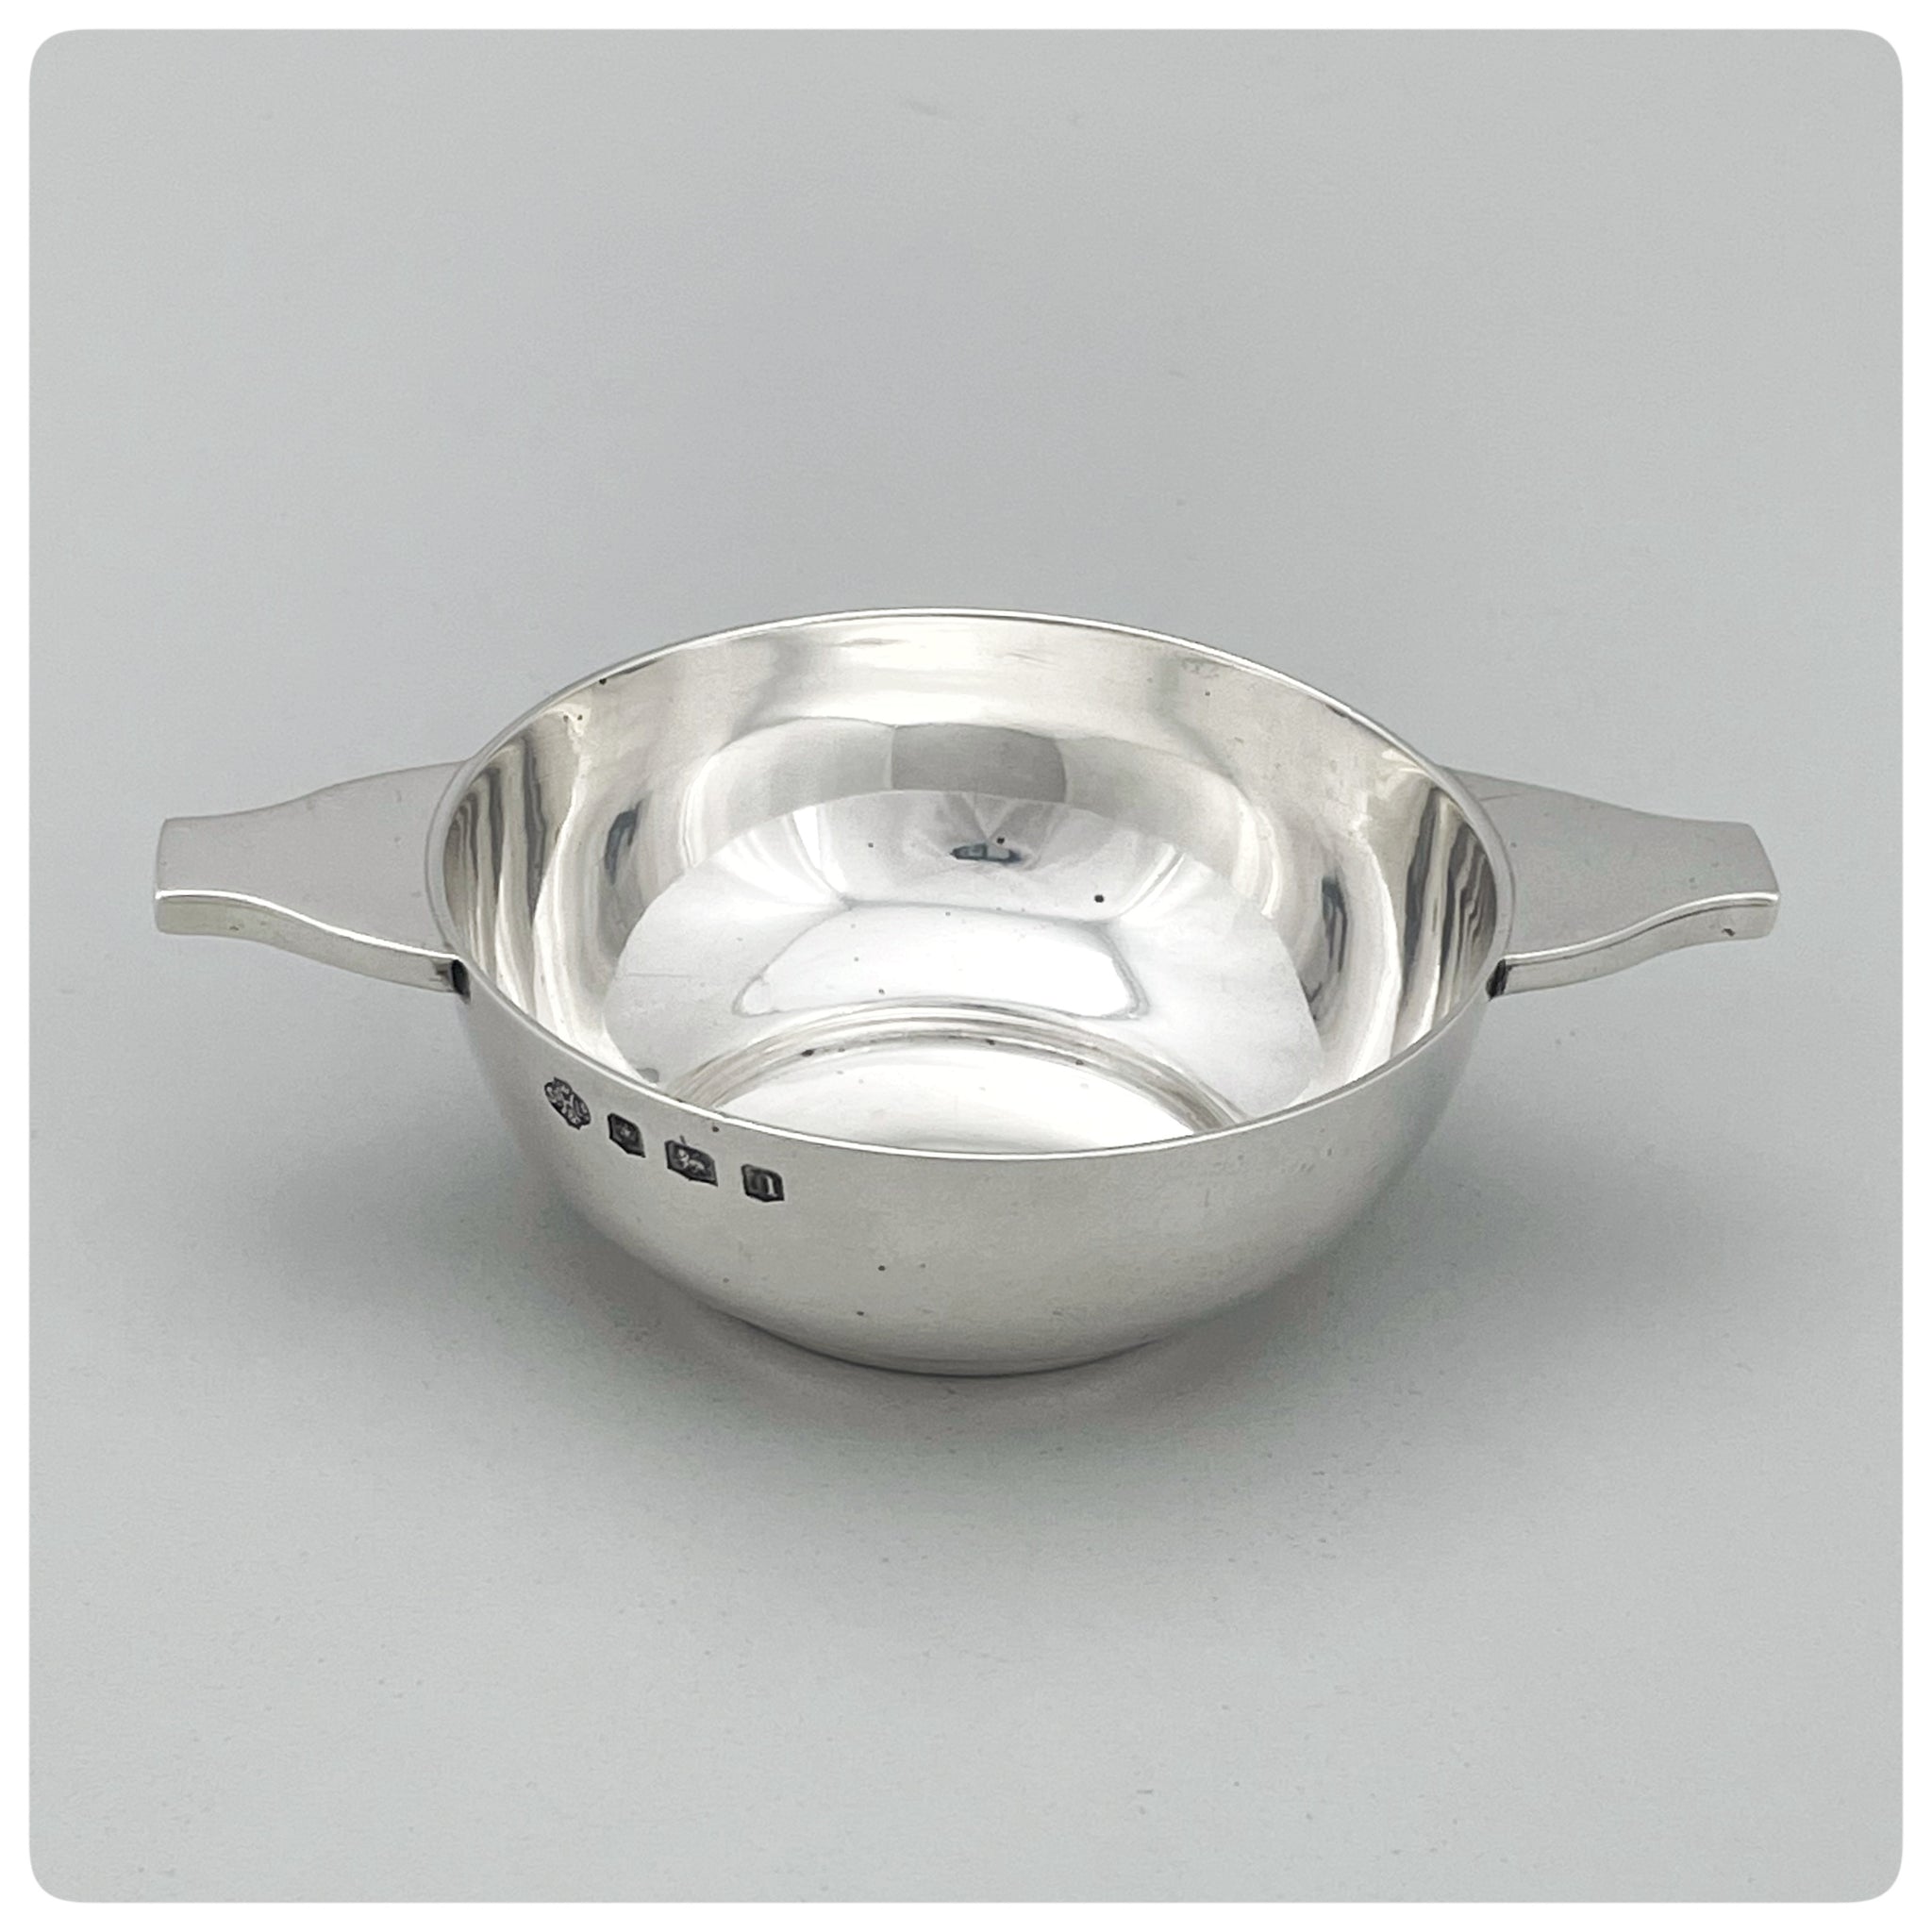 English Sterling Silver Quaich, W. Hutton & Sons Ltd., Sheffield, 1930-1931. Angled view of the side and top, including maker's marks